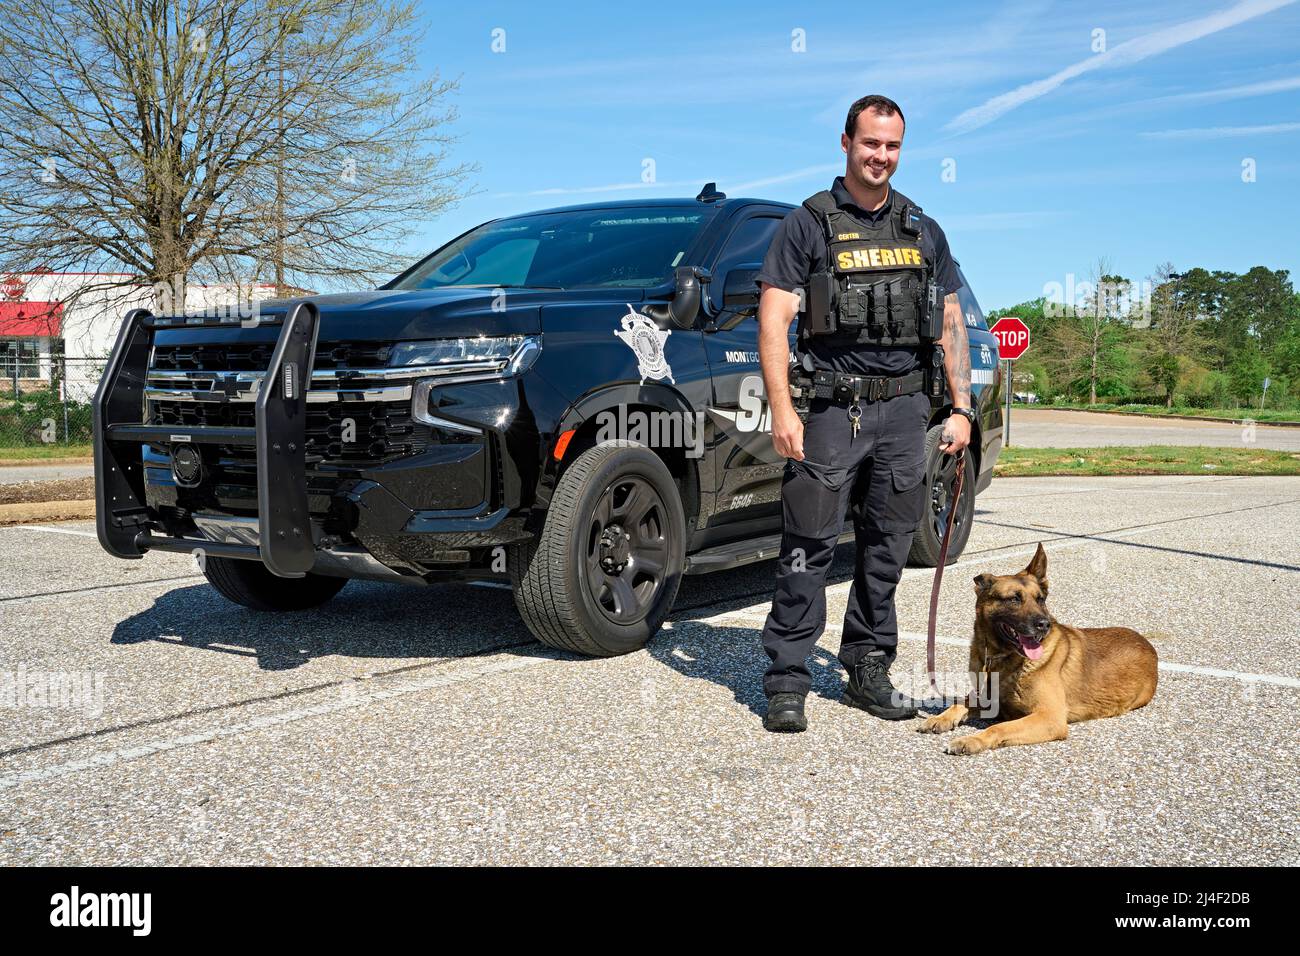 Law enforcement police K-9 officer or deputy sheriff K-9 with his police K-9 dog in front of a police SUV cruiser in Montgomery Alabama, USA. Stock Photo